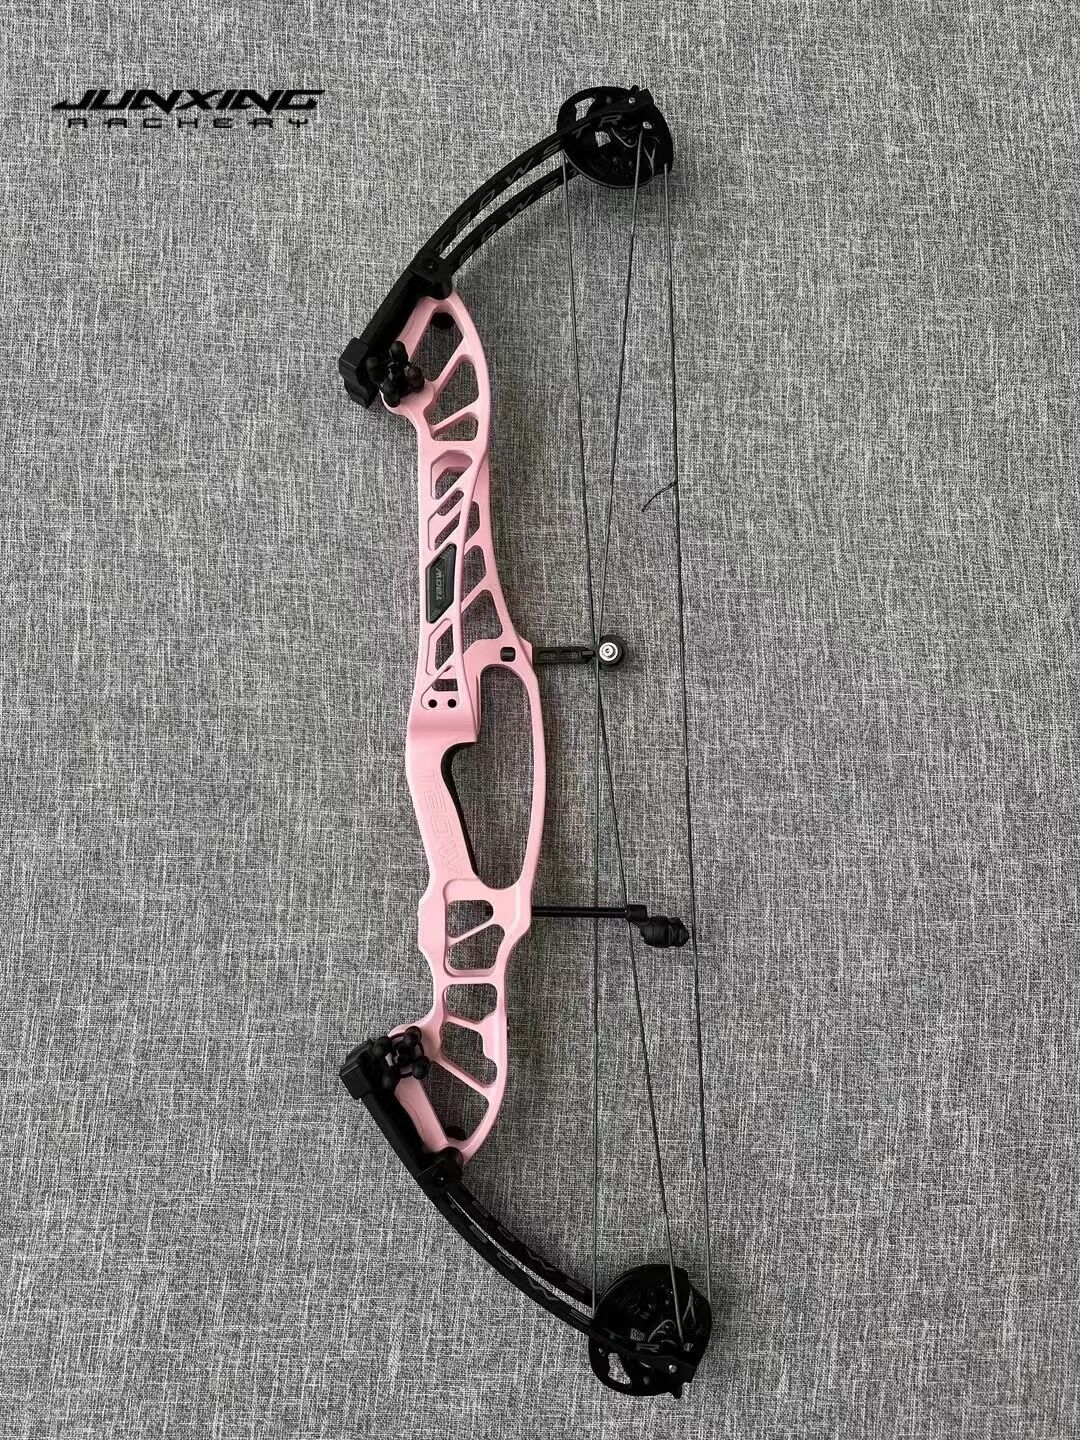 🎯JUNXING Archery H20 Compound Bow for Upgrade Archery Target